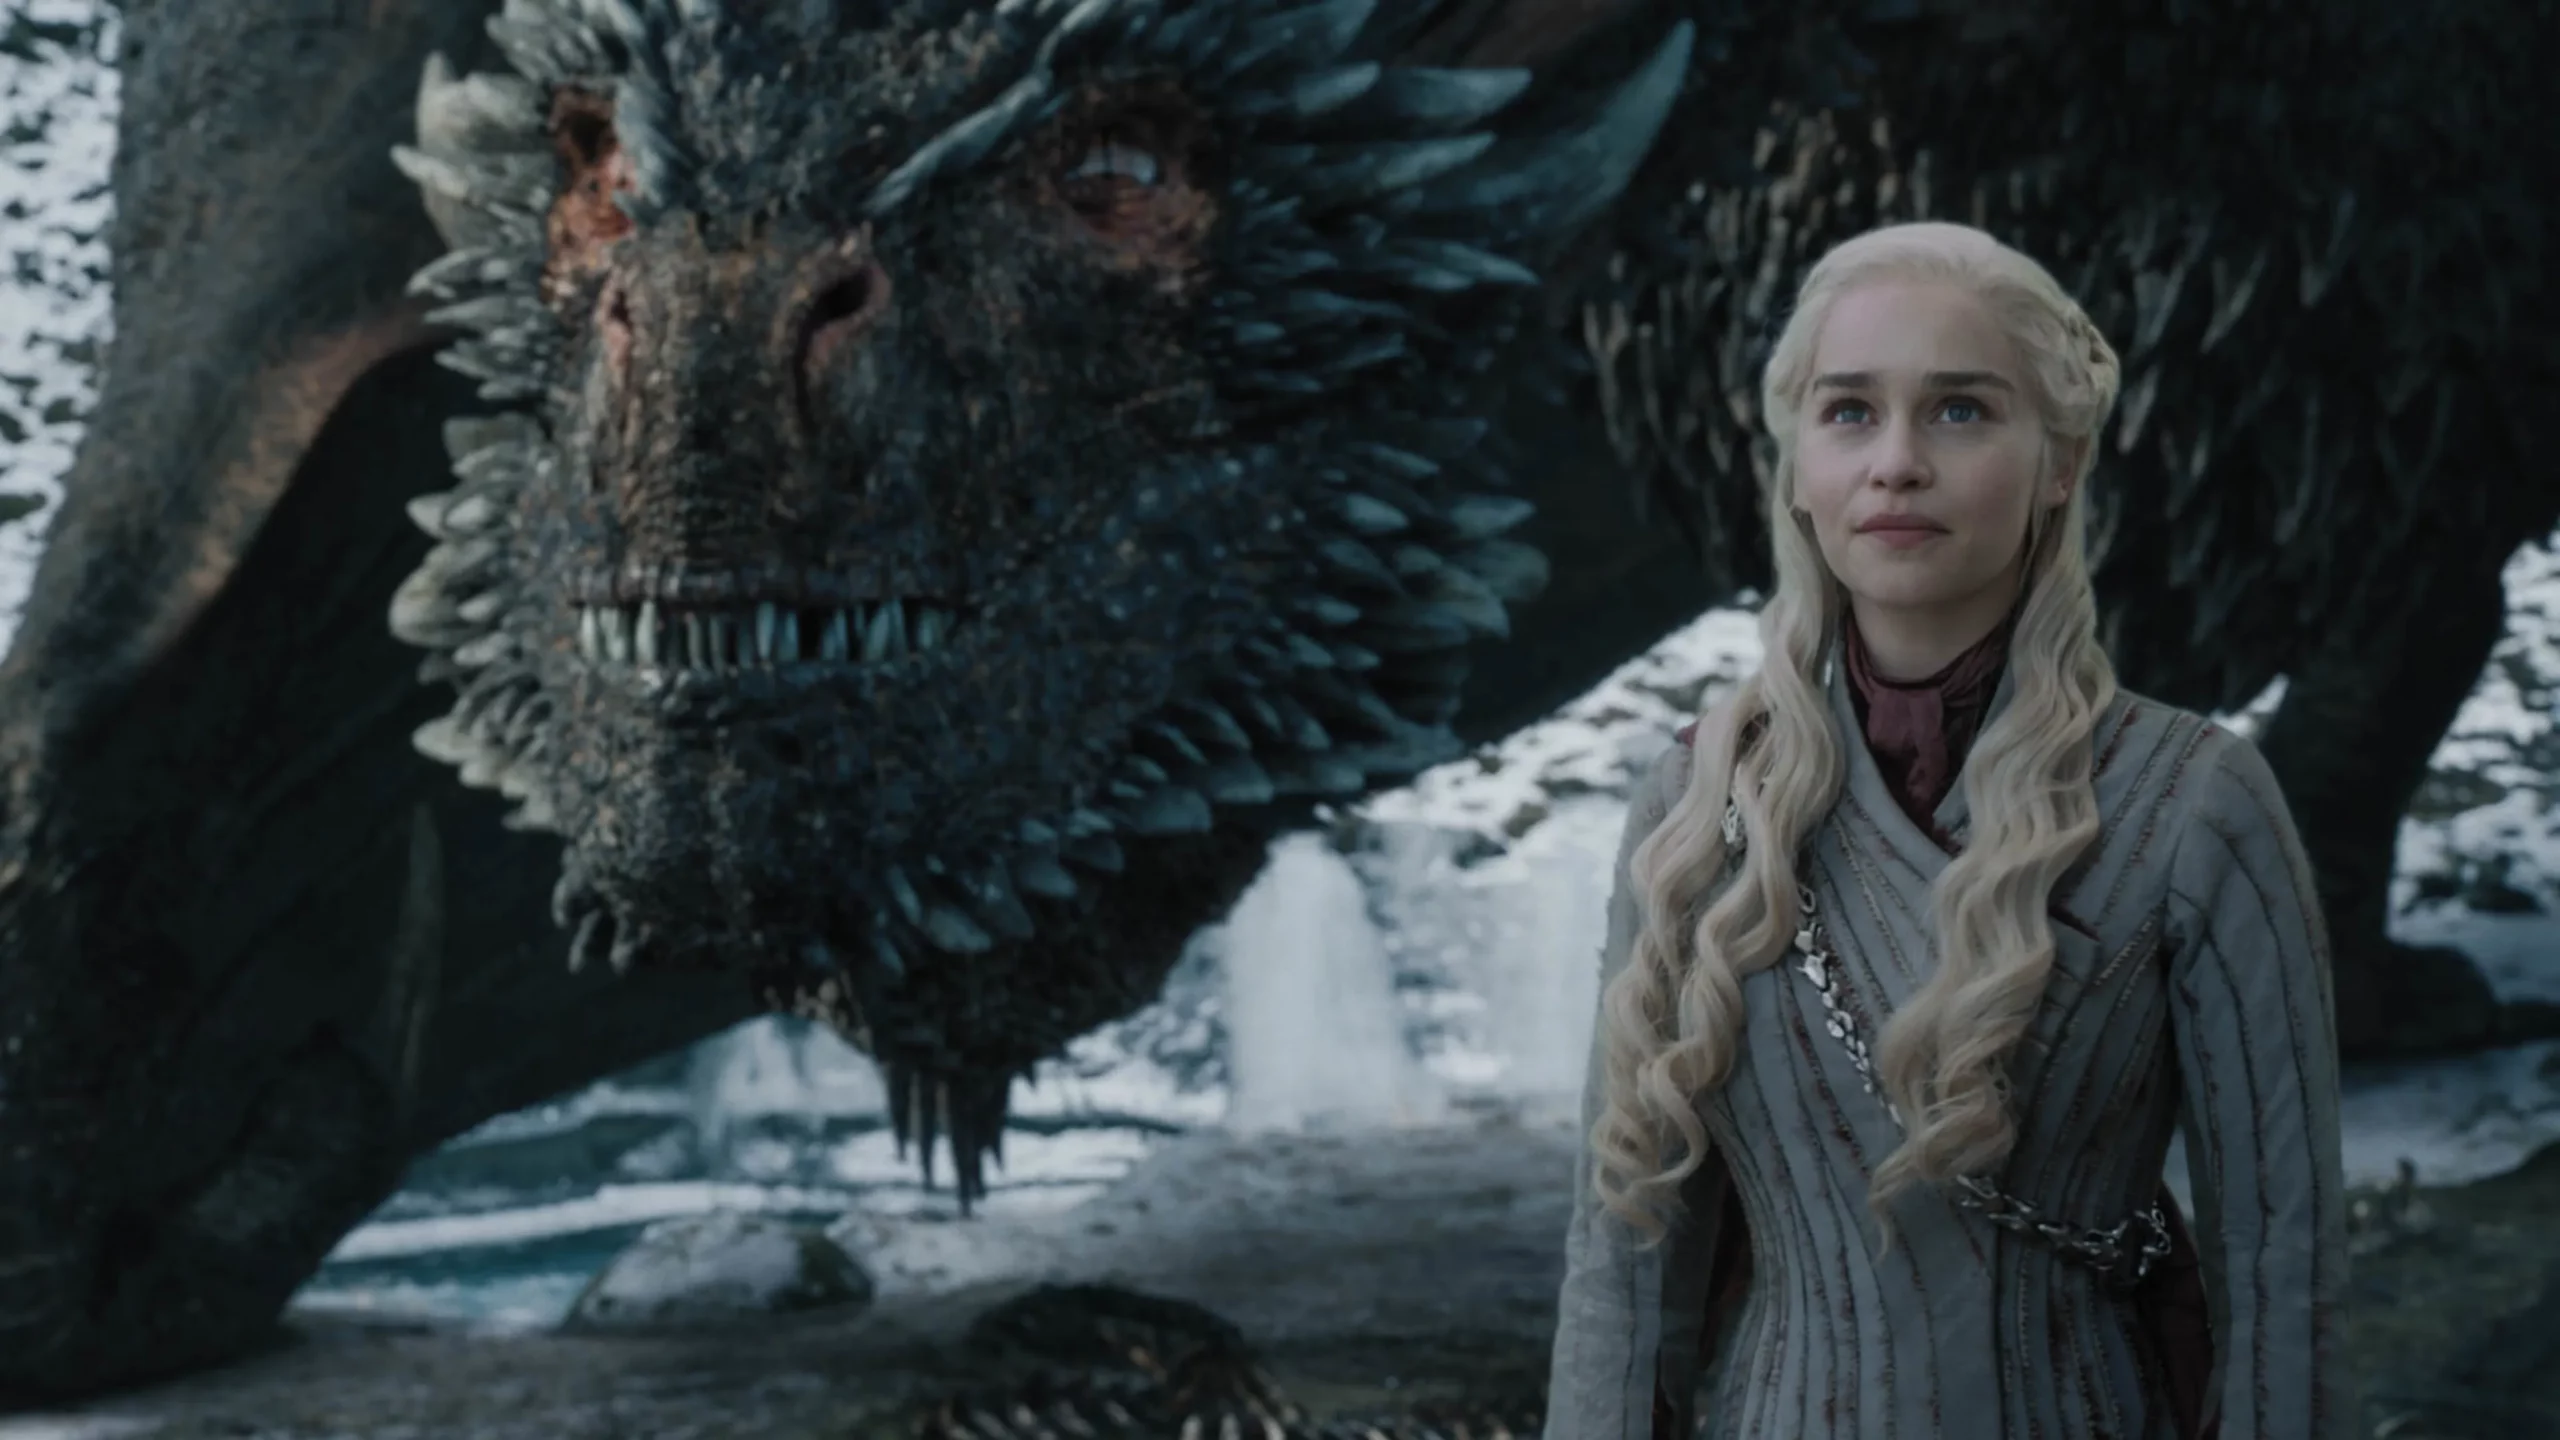 The image contains the character Dany and her dragon Drogon